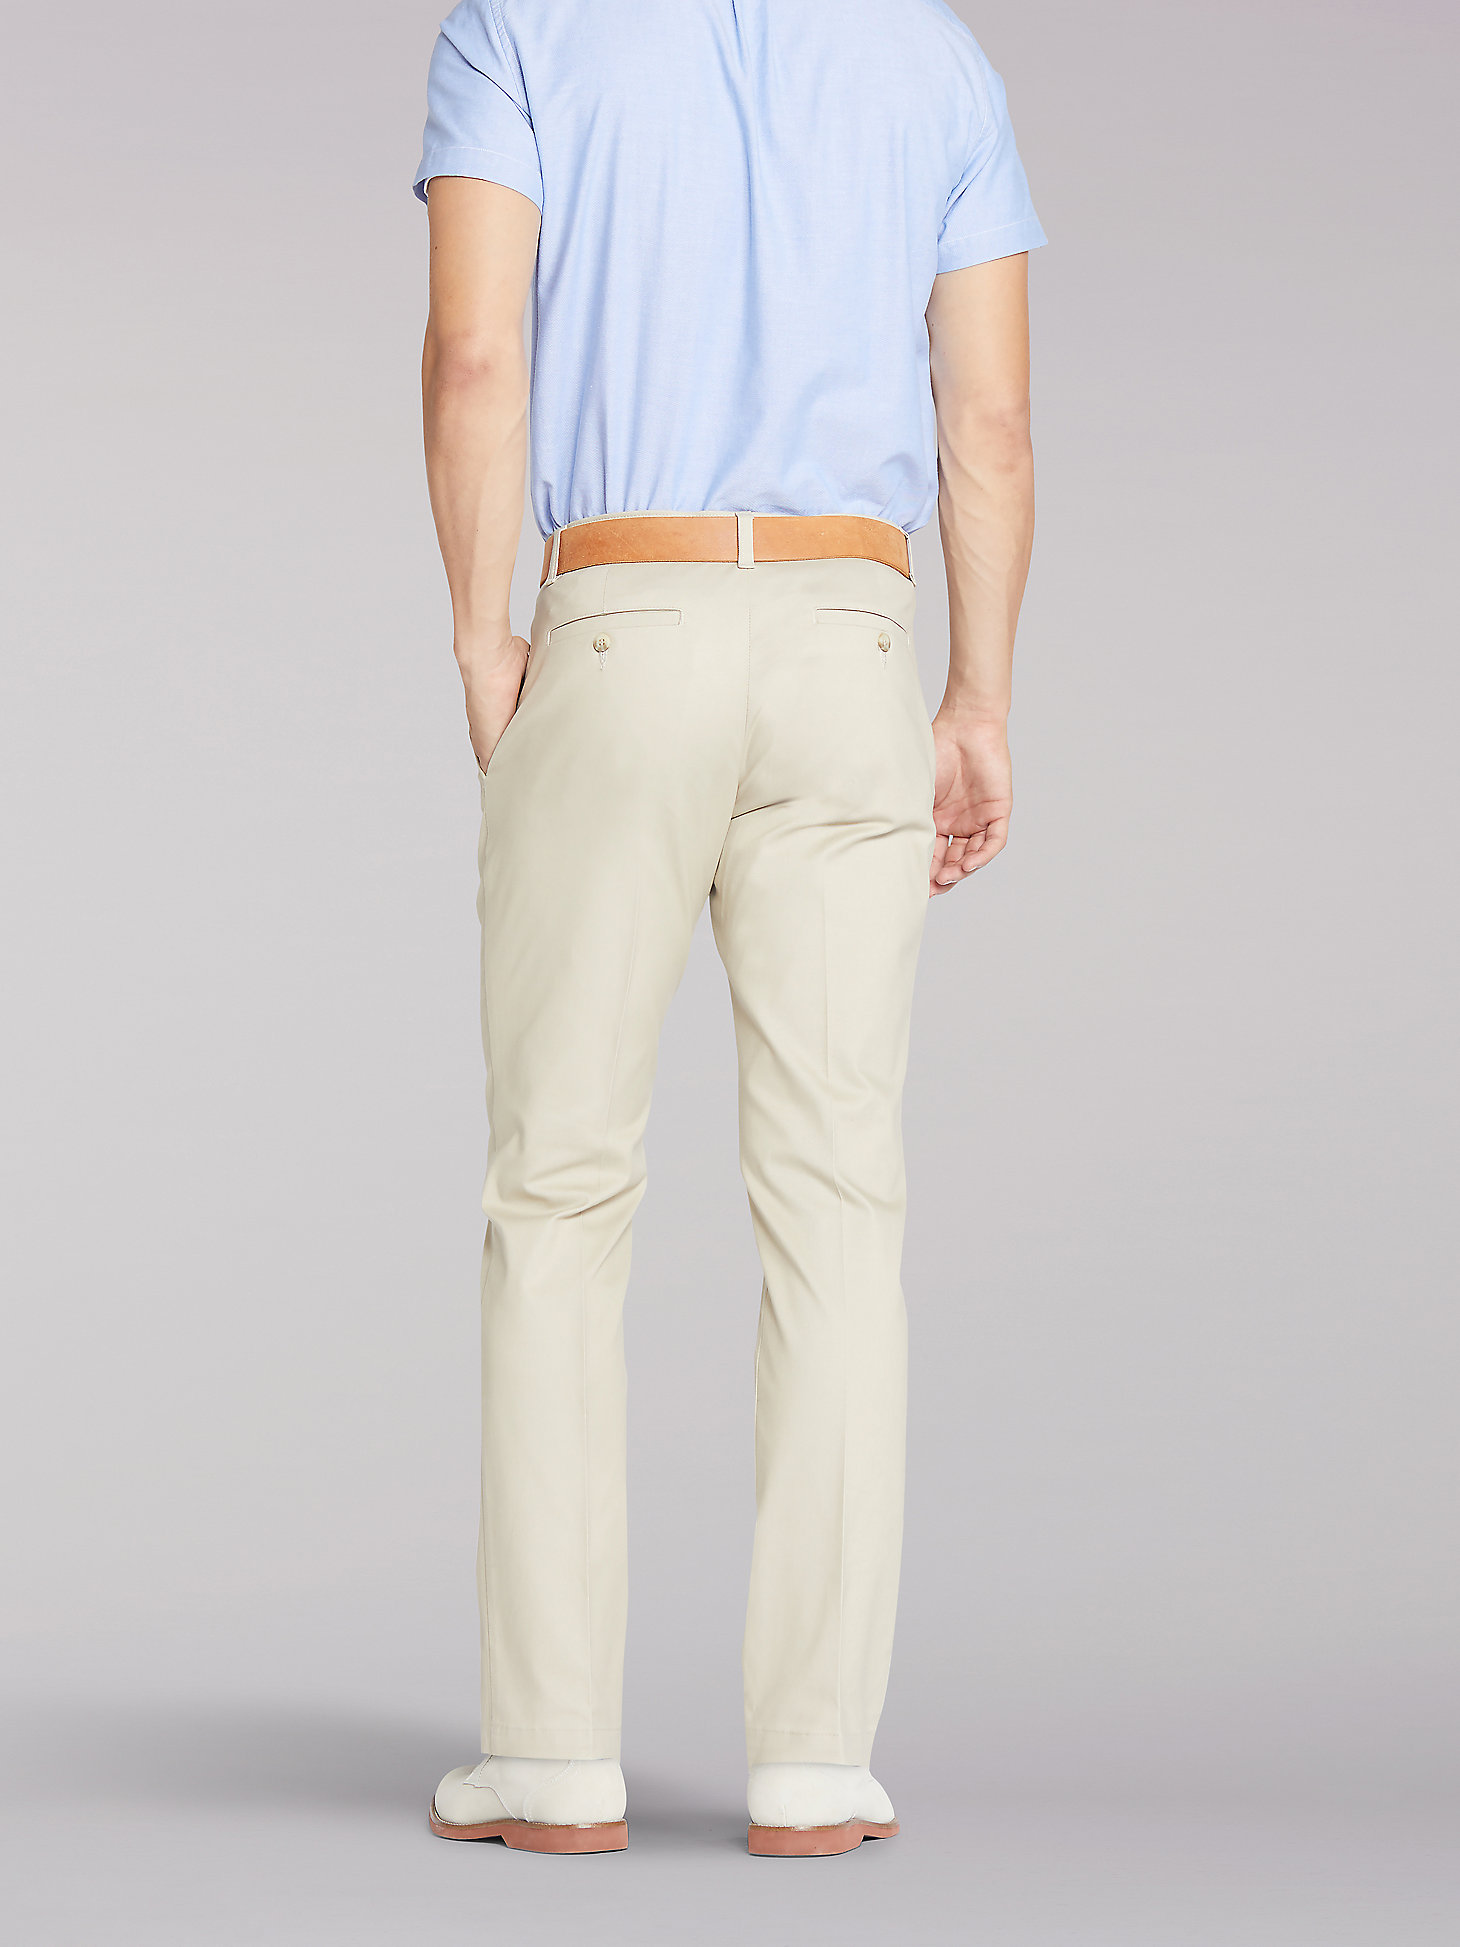 Men's Total Freedom Slim Flat Front Pant in Sand alternative view 1